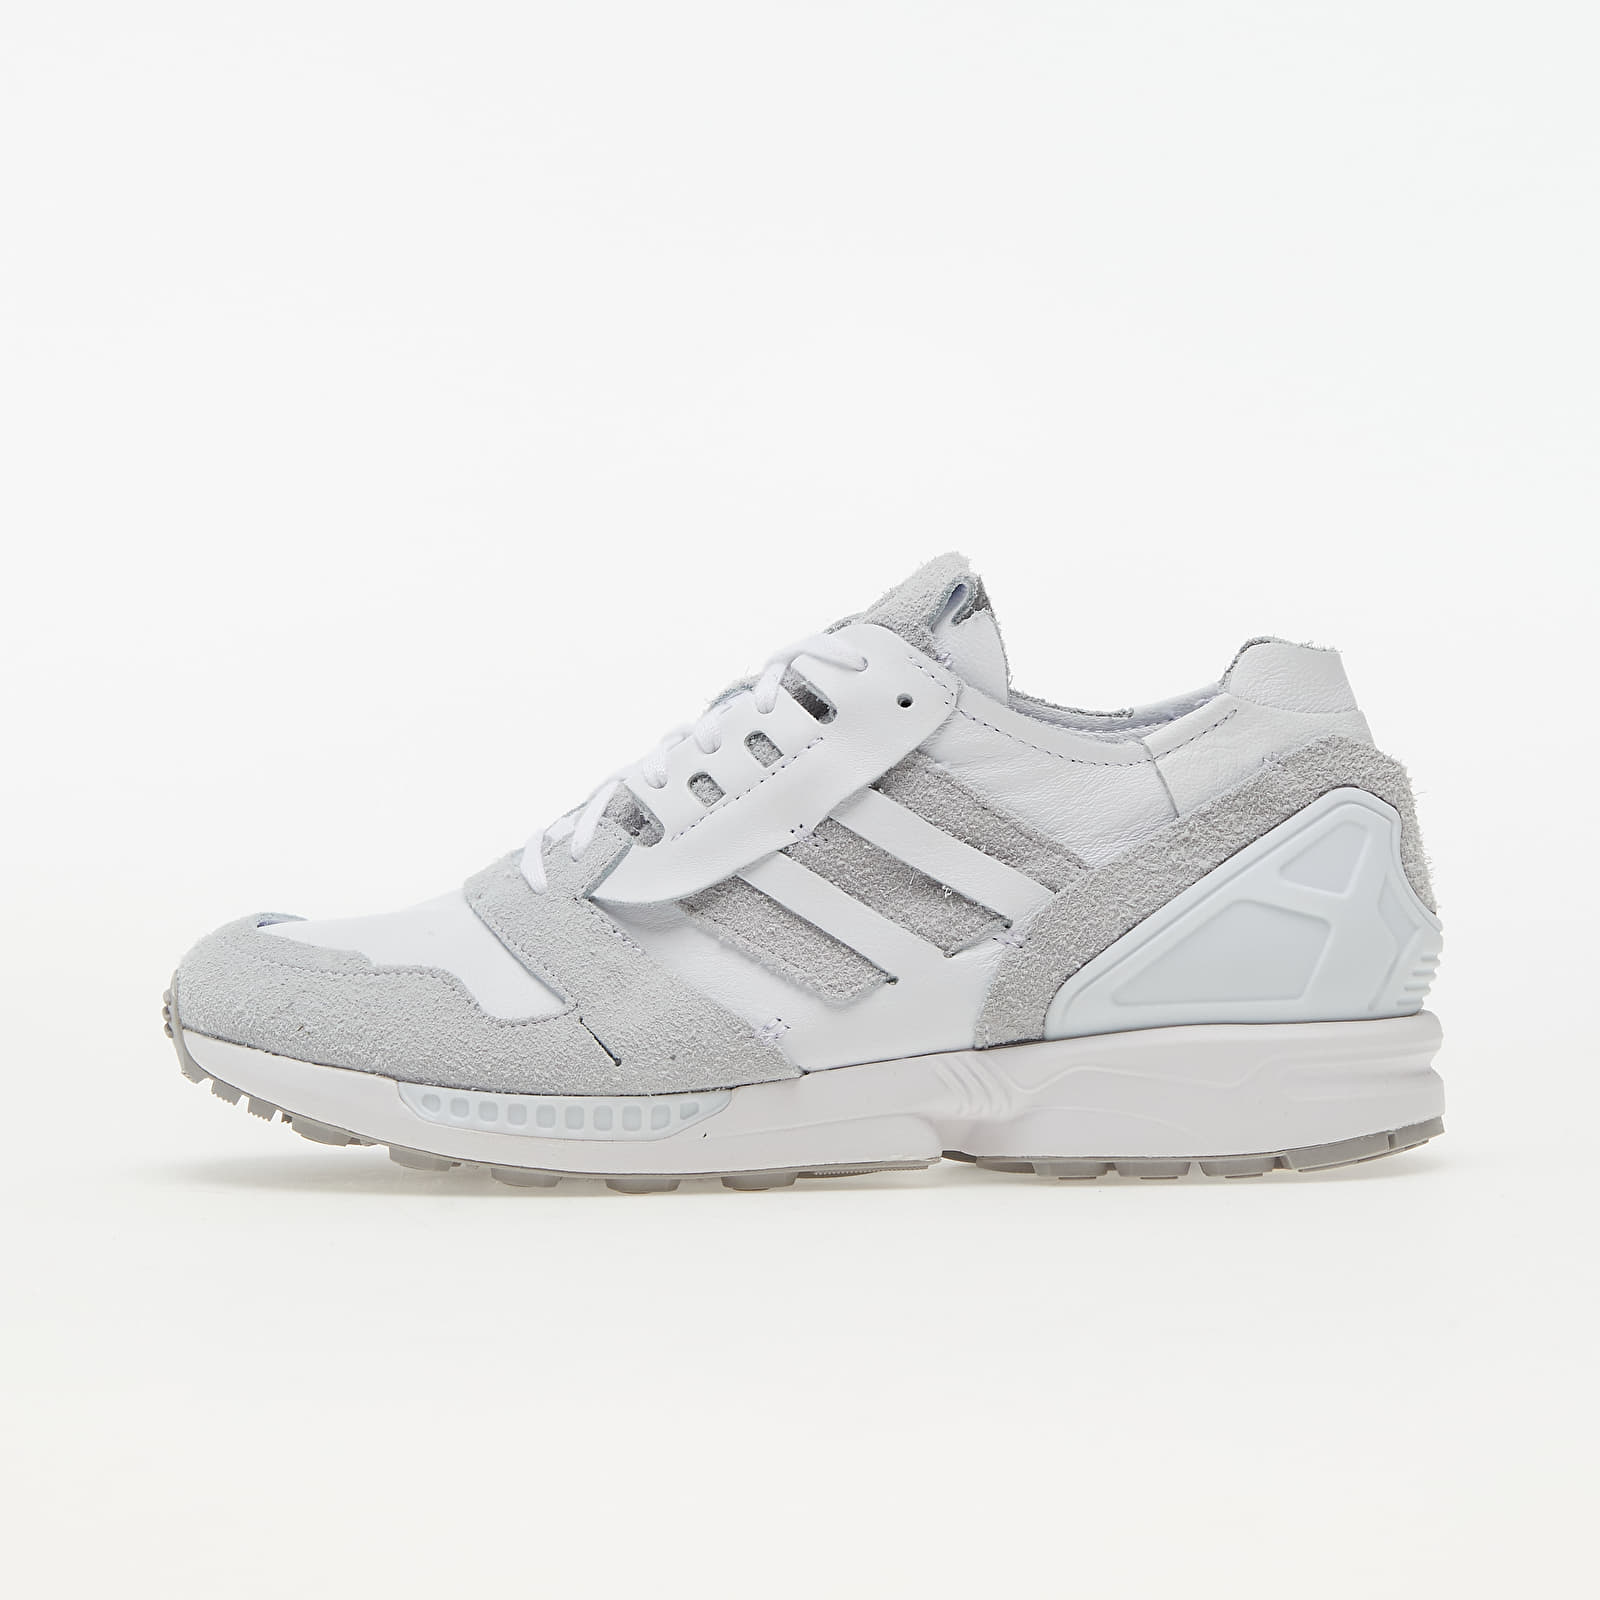 Men's shoes adidas ZX 8000 Minimalist Ftw White/ Grey Two/ Ftw White